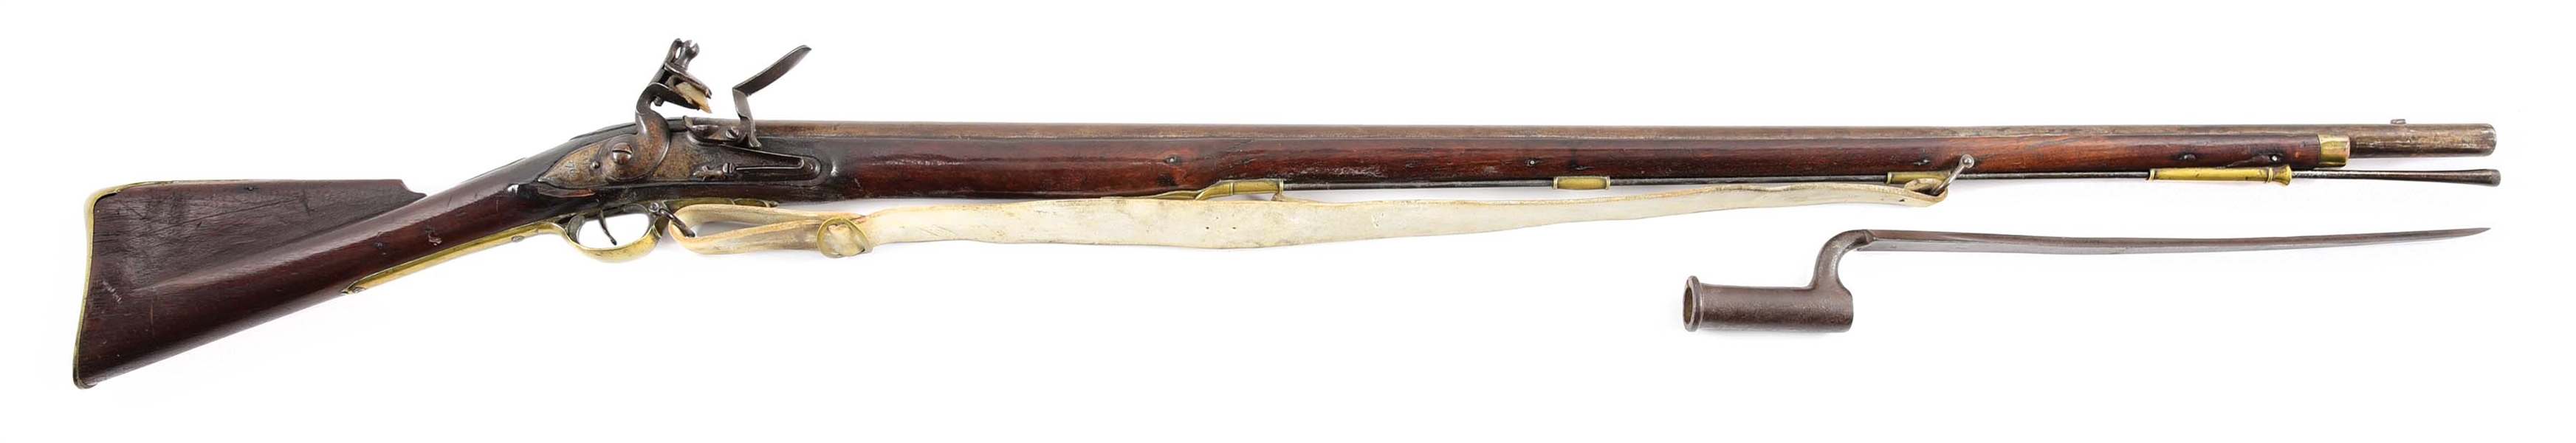 (A) P1756 BRITISH "LONG LAND" MUSKET OF THE 43RD REGIMENT OF FOOT